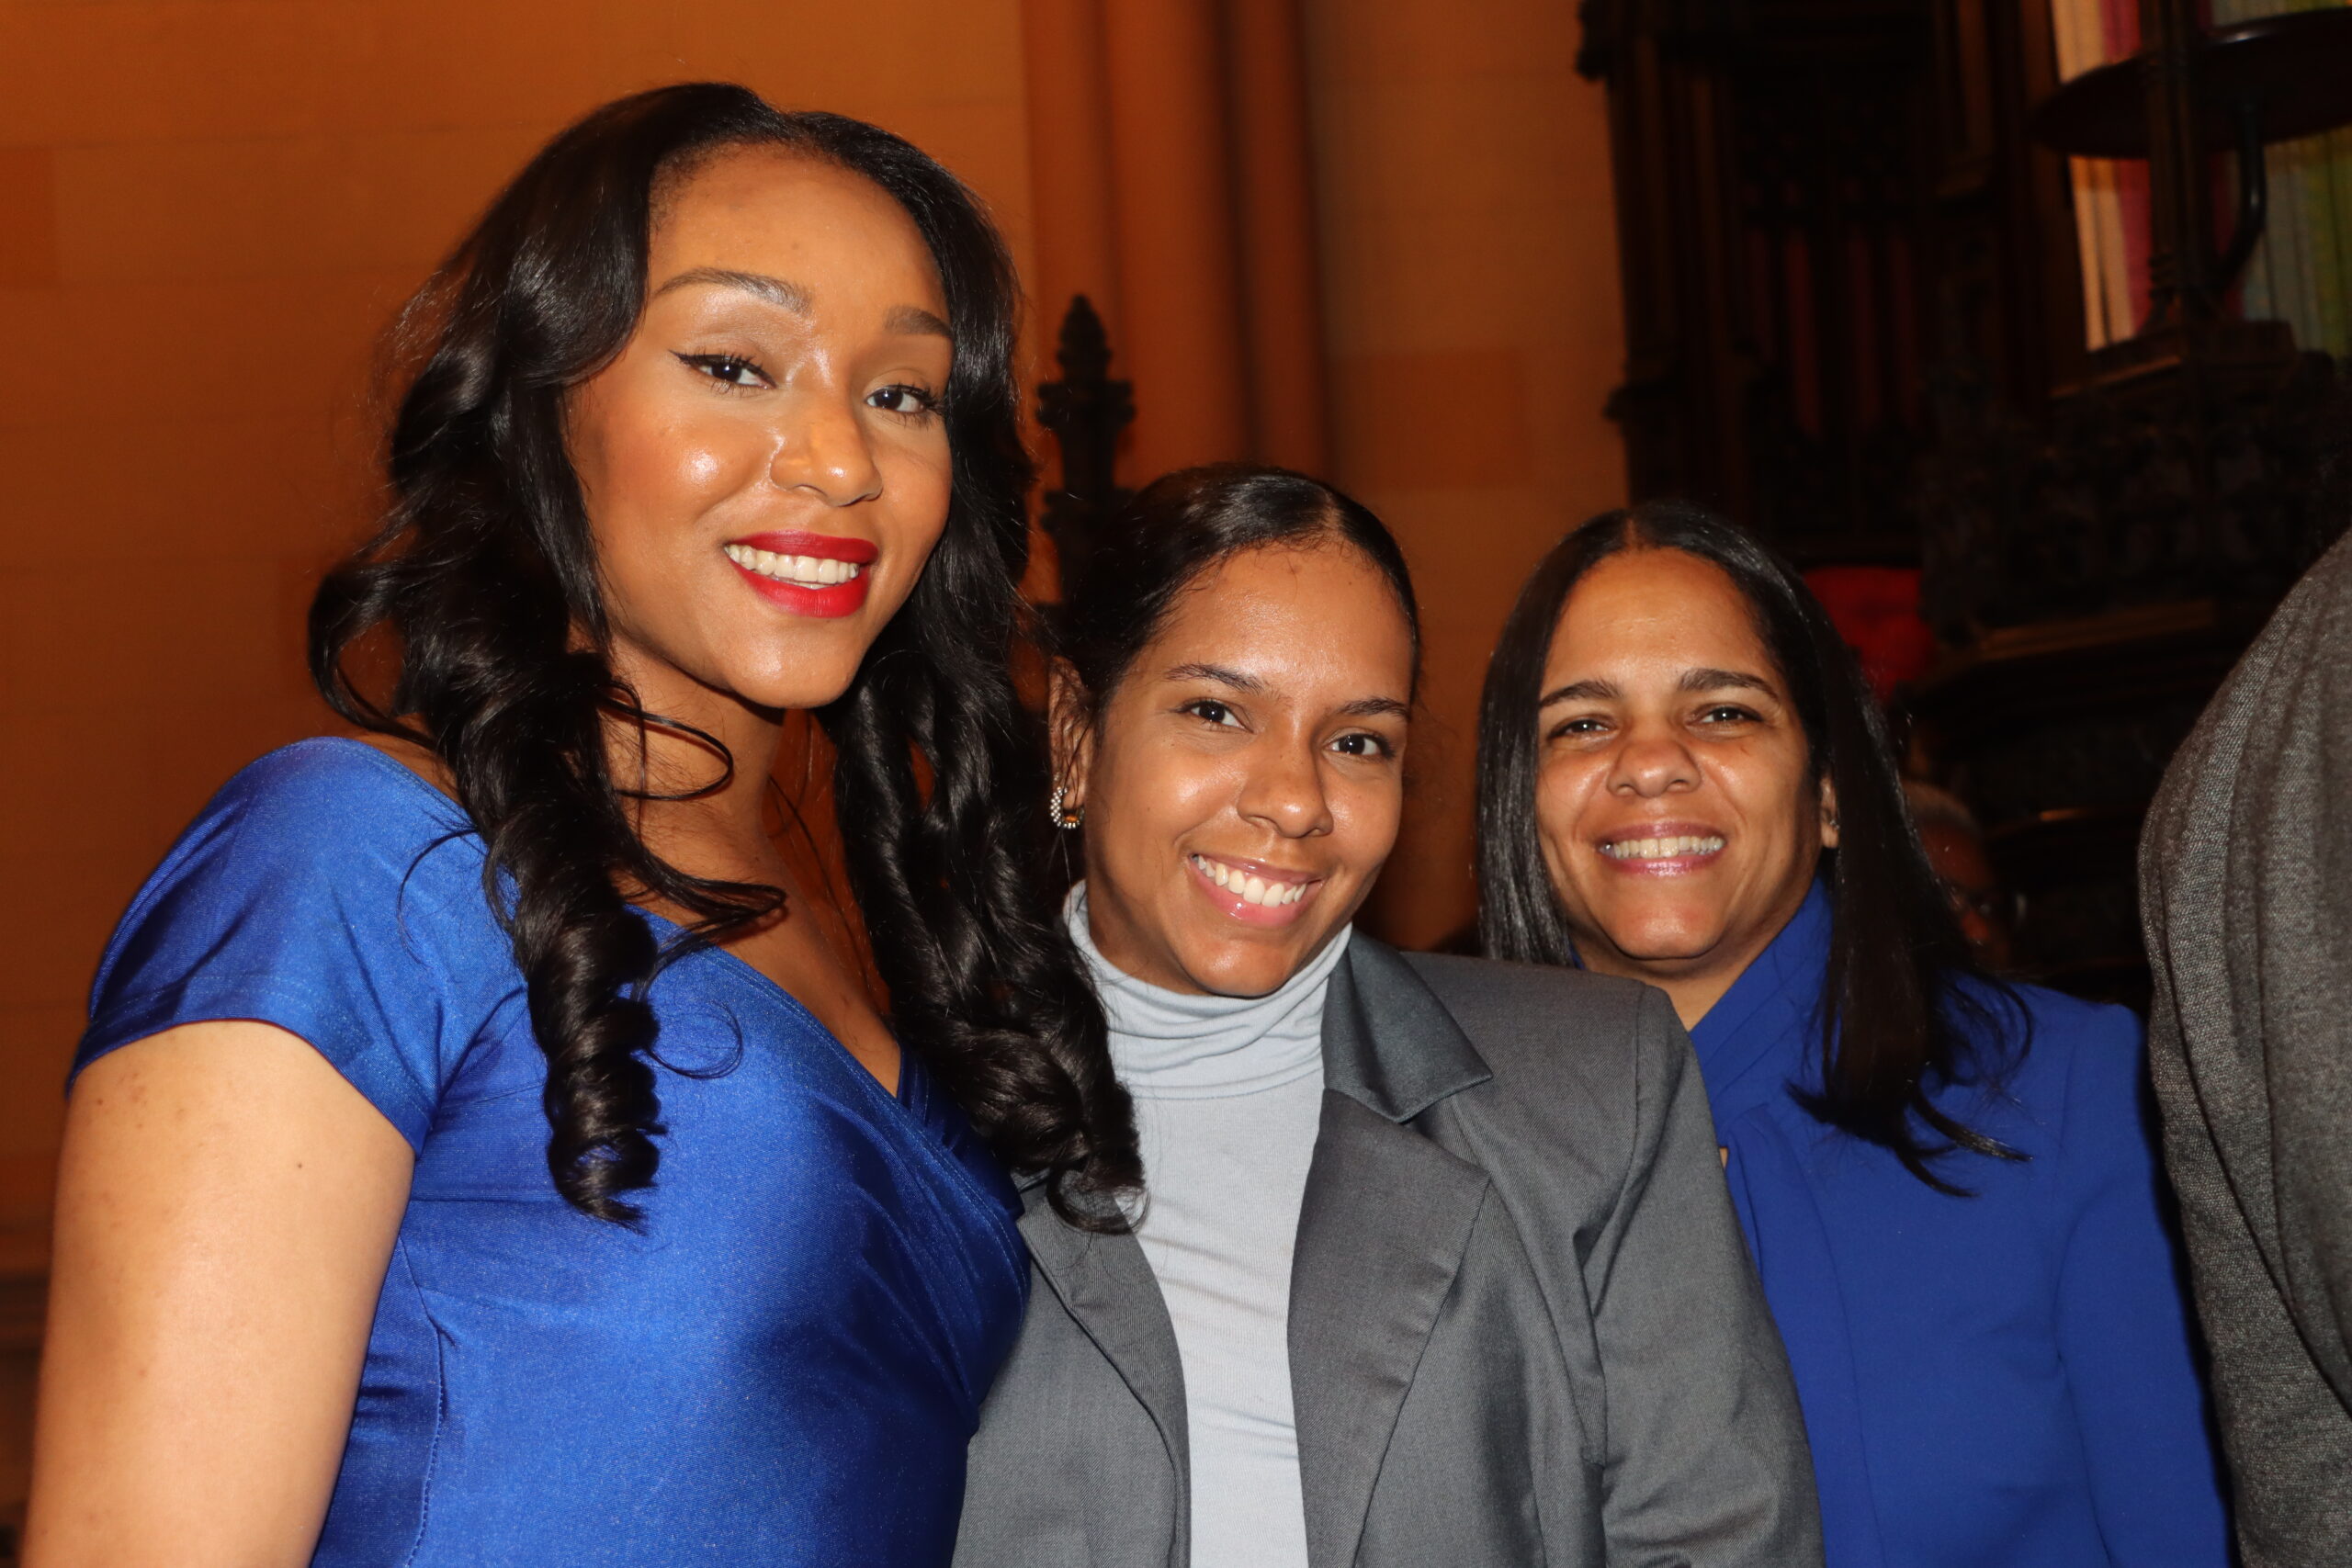 A candid capture of three of Judge Linda Wilson's children, showcasing the personal joy and family support behind her professional achievements at Linda Wilson's swearing-in.